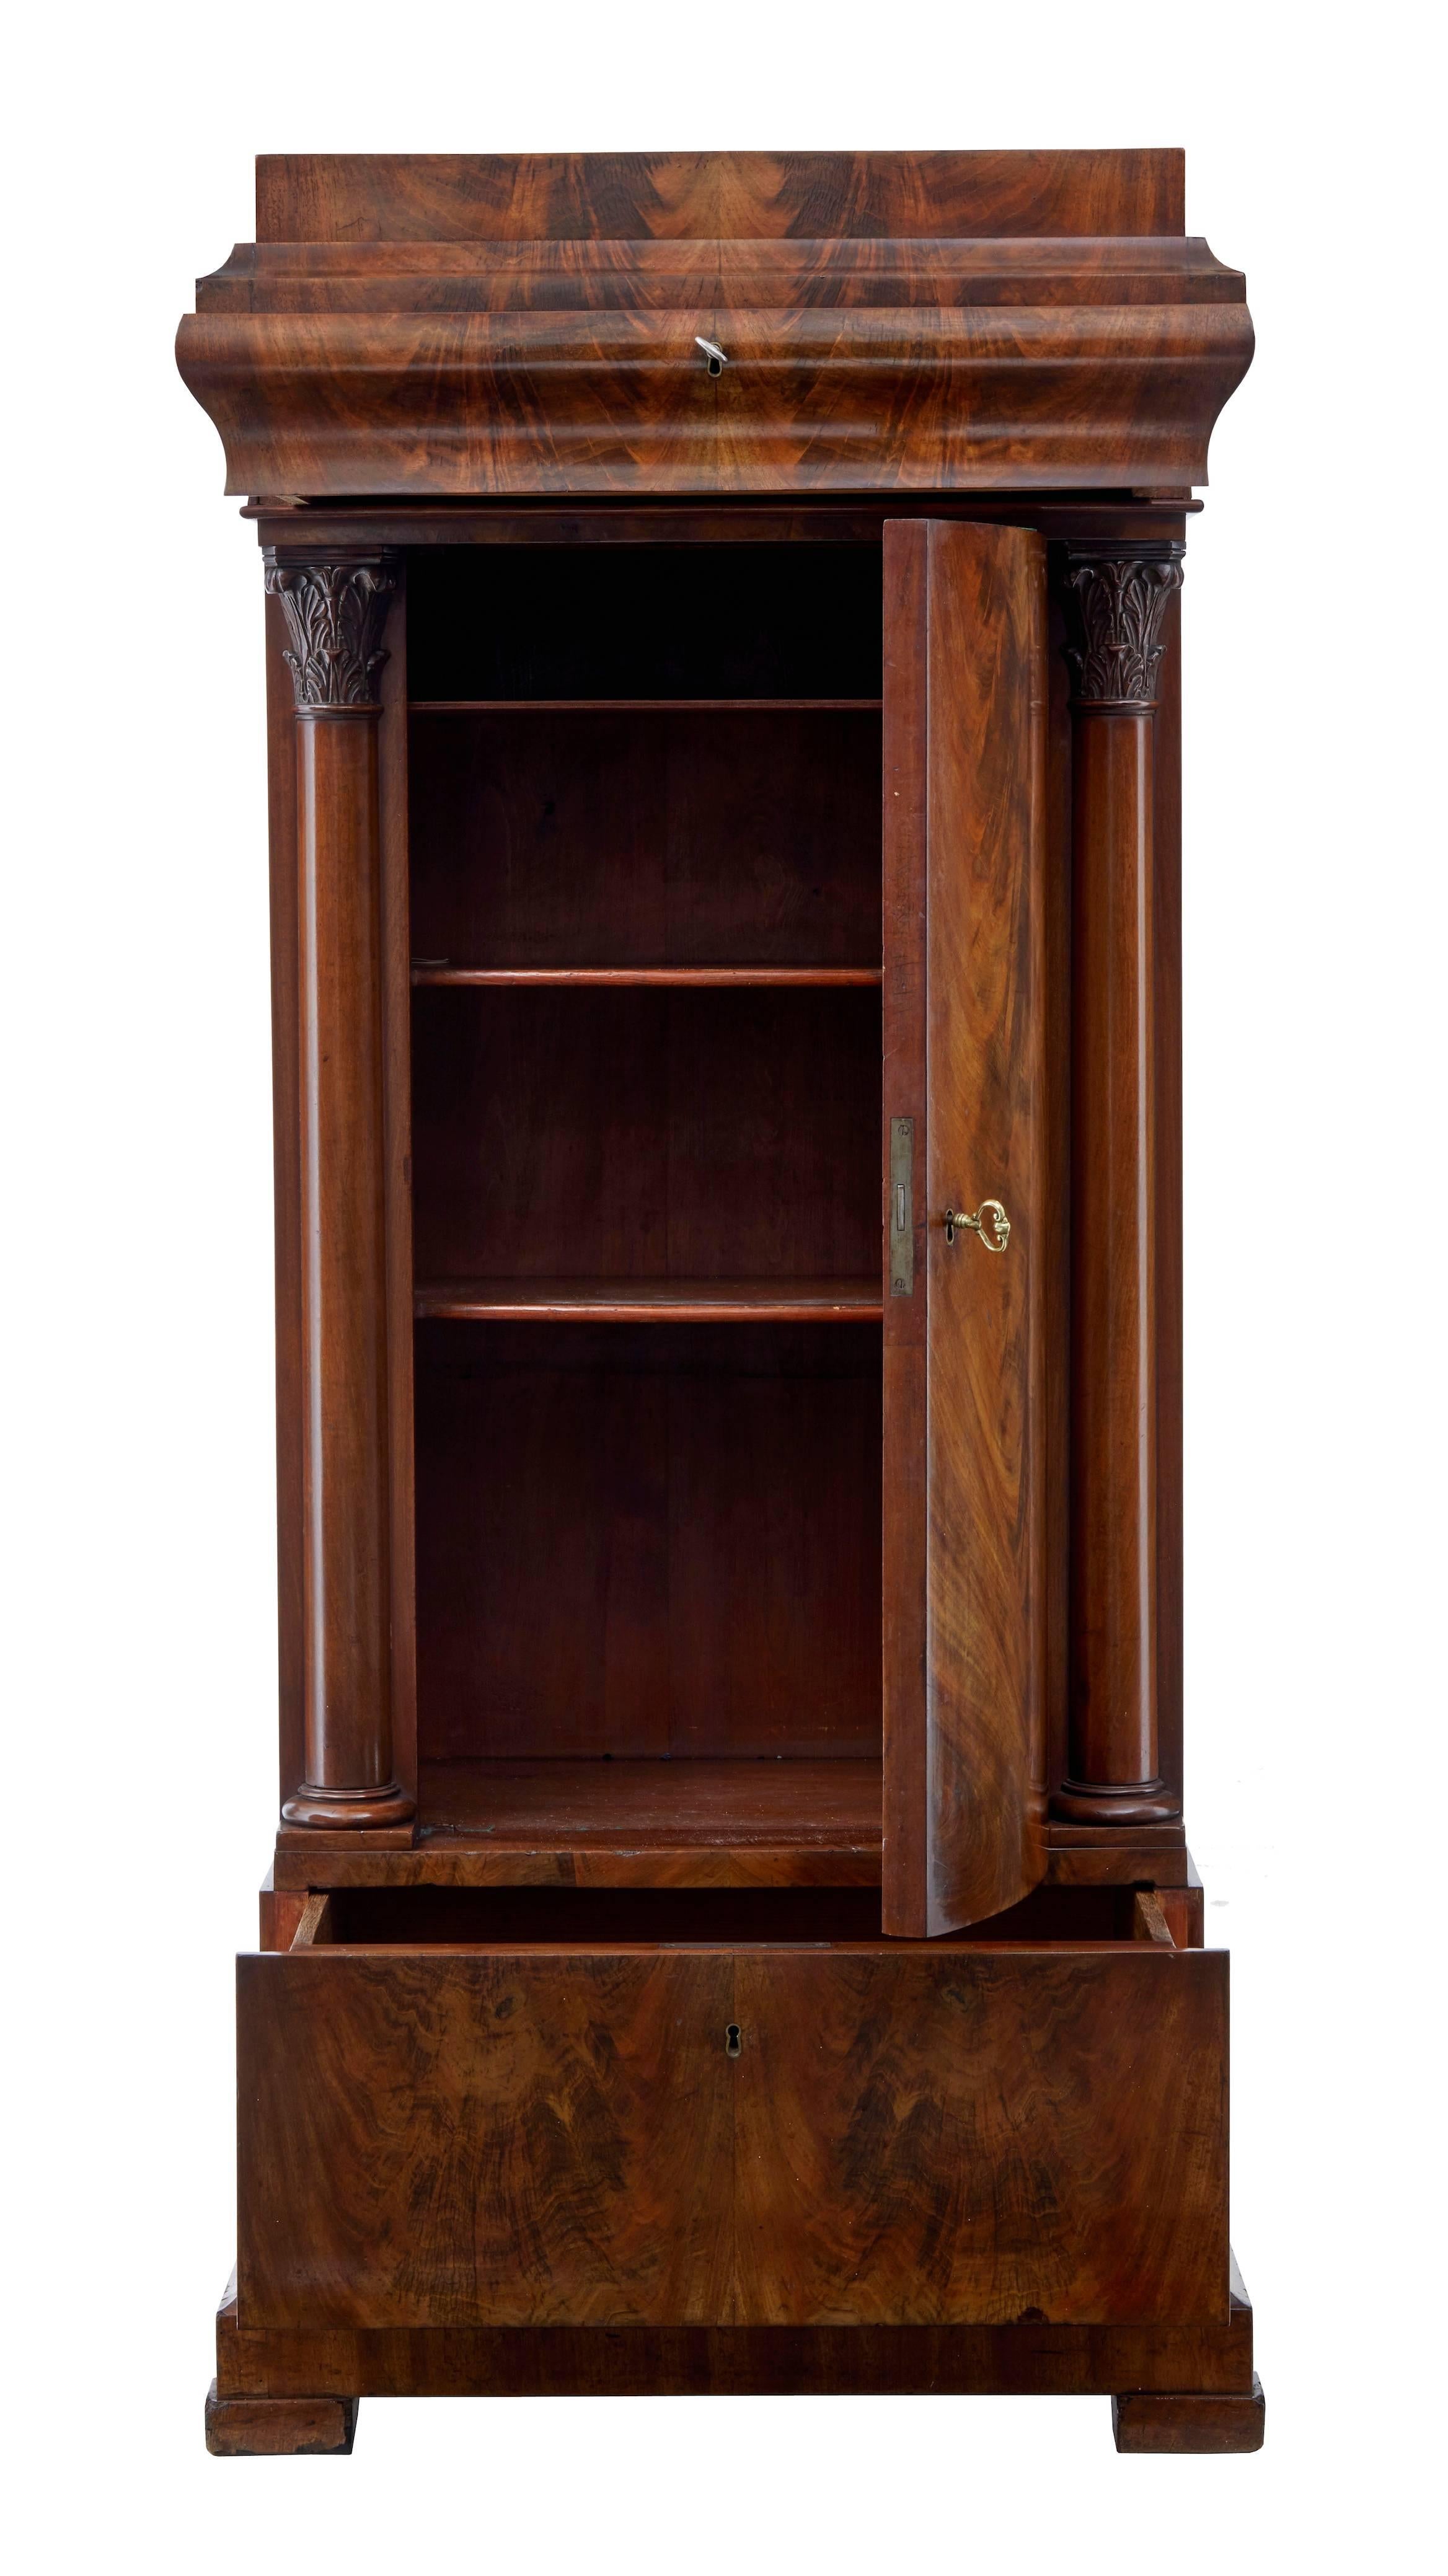 Fine quality Biedermeier cabinet, circa 1860.
Made from fine quality flame mahogany veneers.
Single shaped door that opens to three shelves, flanked either side by carved Corinthian columns. Above which is a single drawer completed with a deep